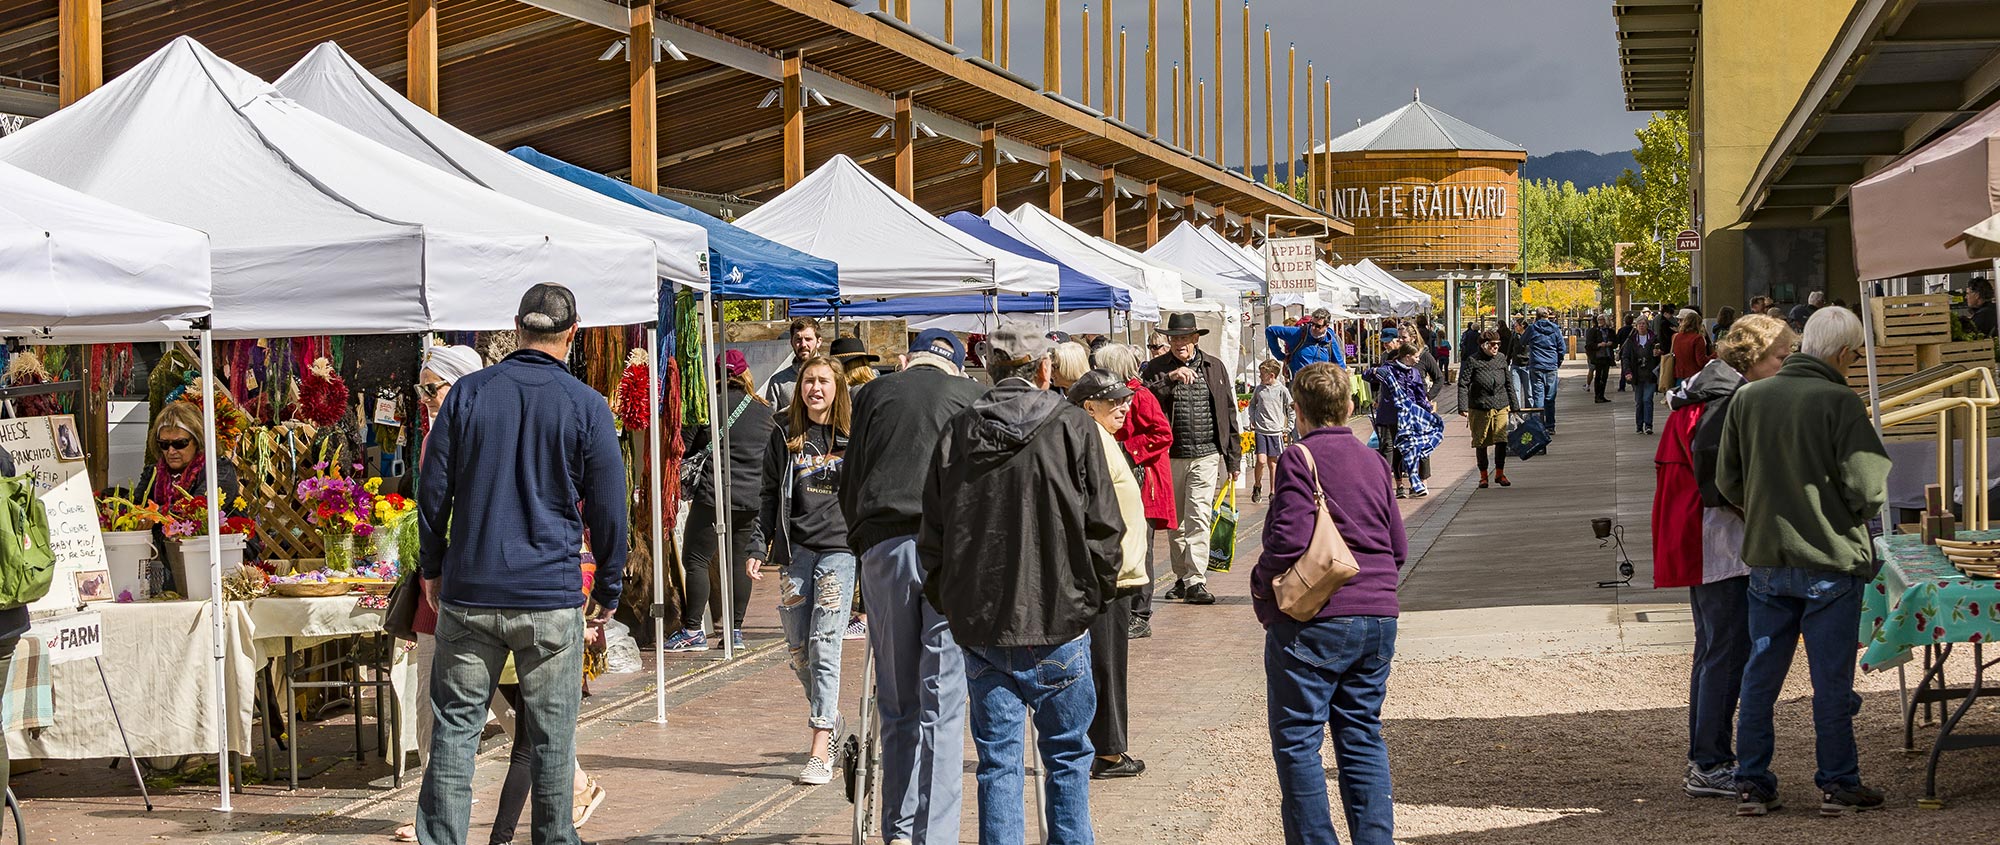 The Farmer's Market brings local fresh food, honey, crafts, and much more to the Railyard in Santa Fe.